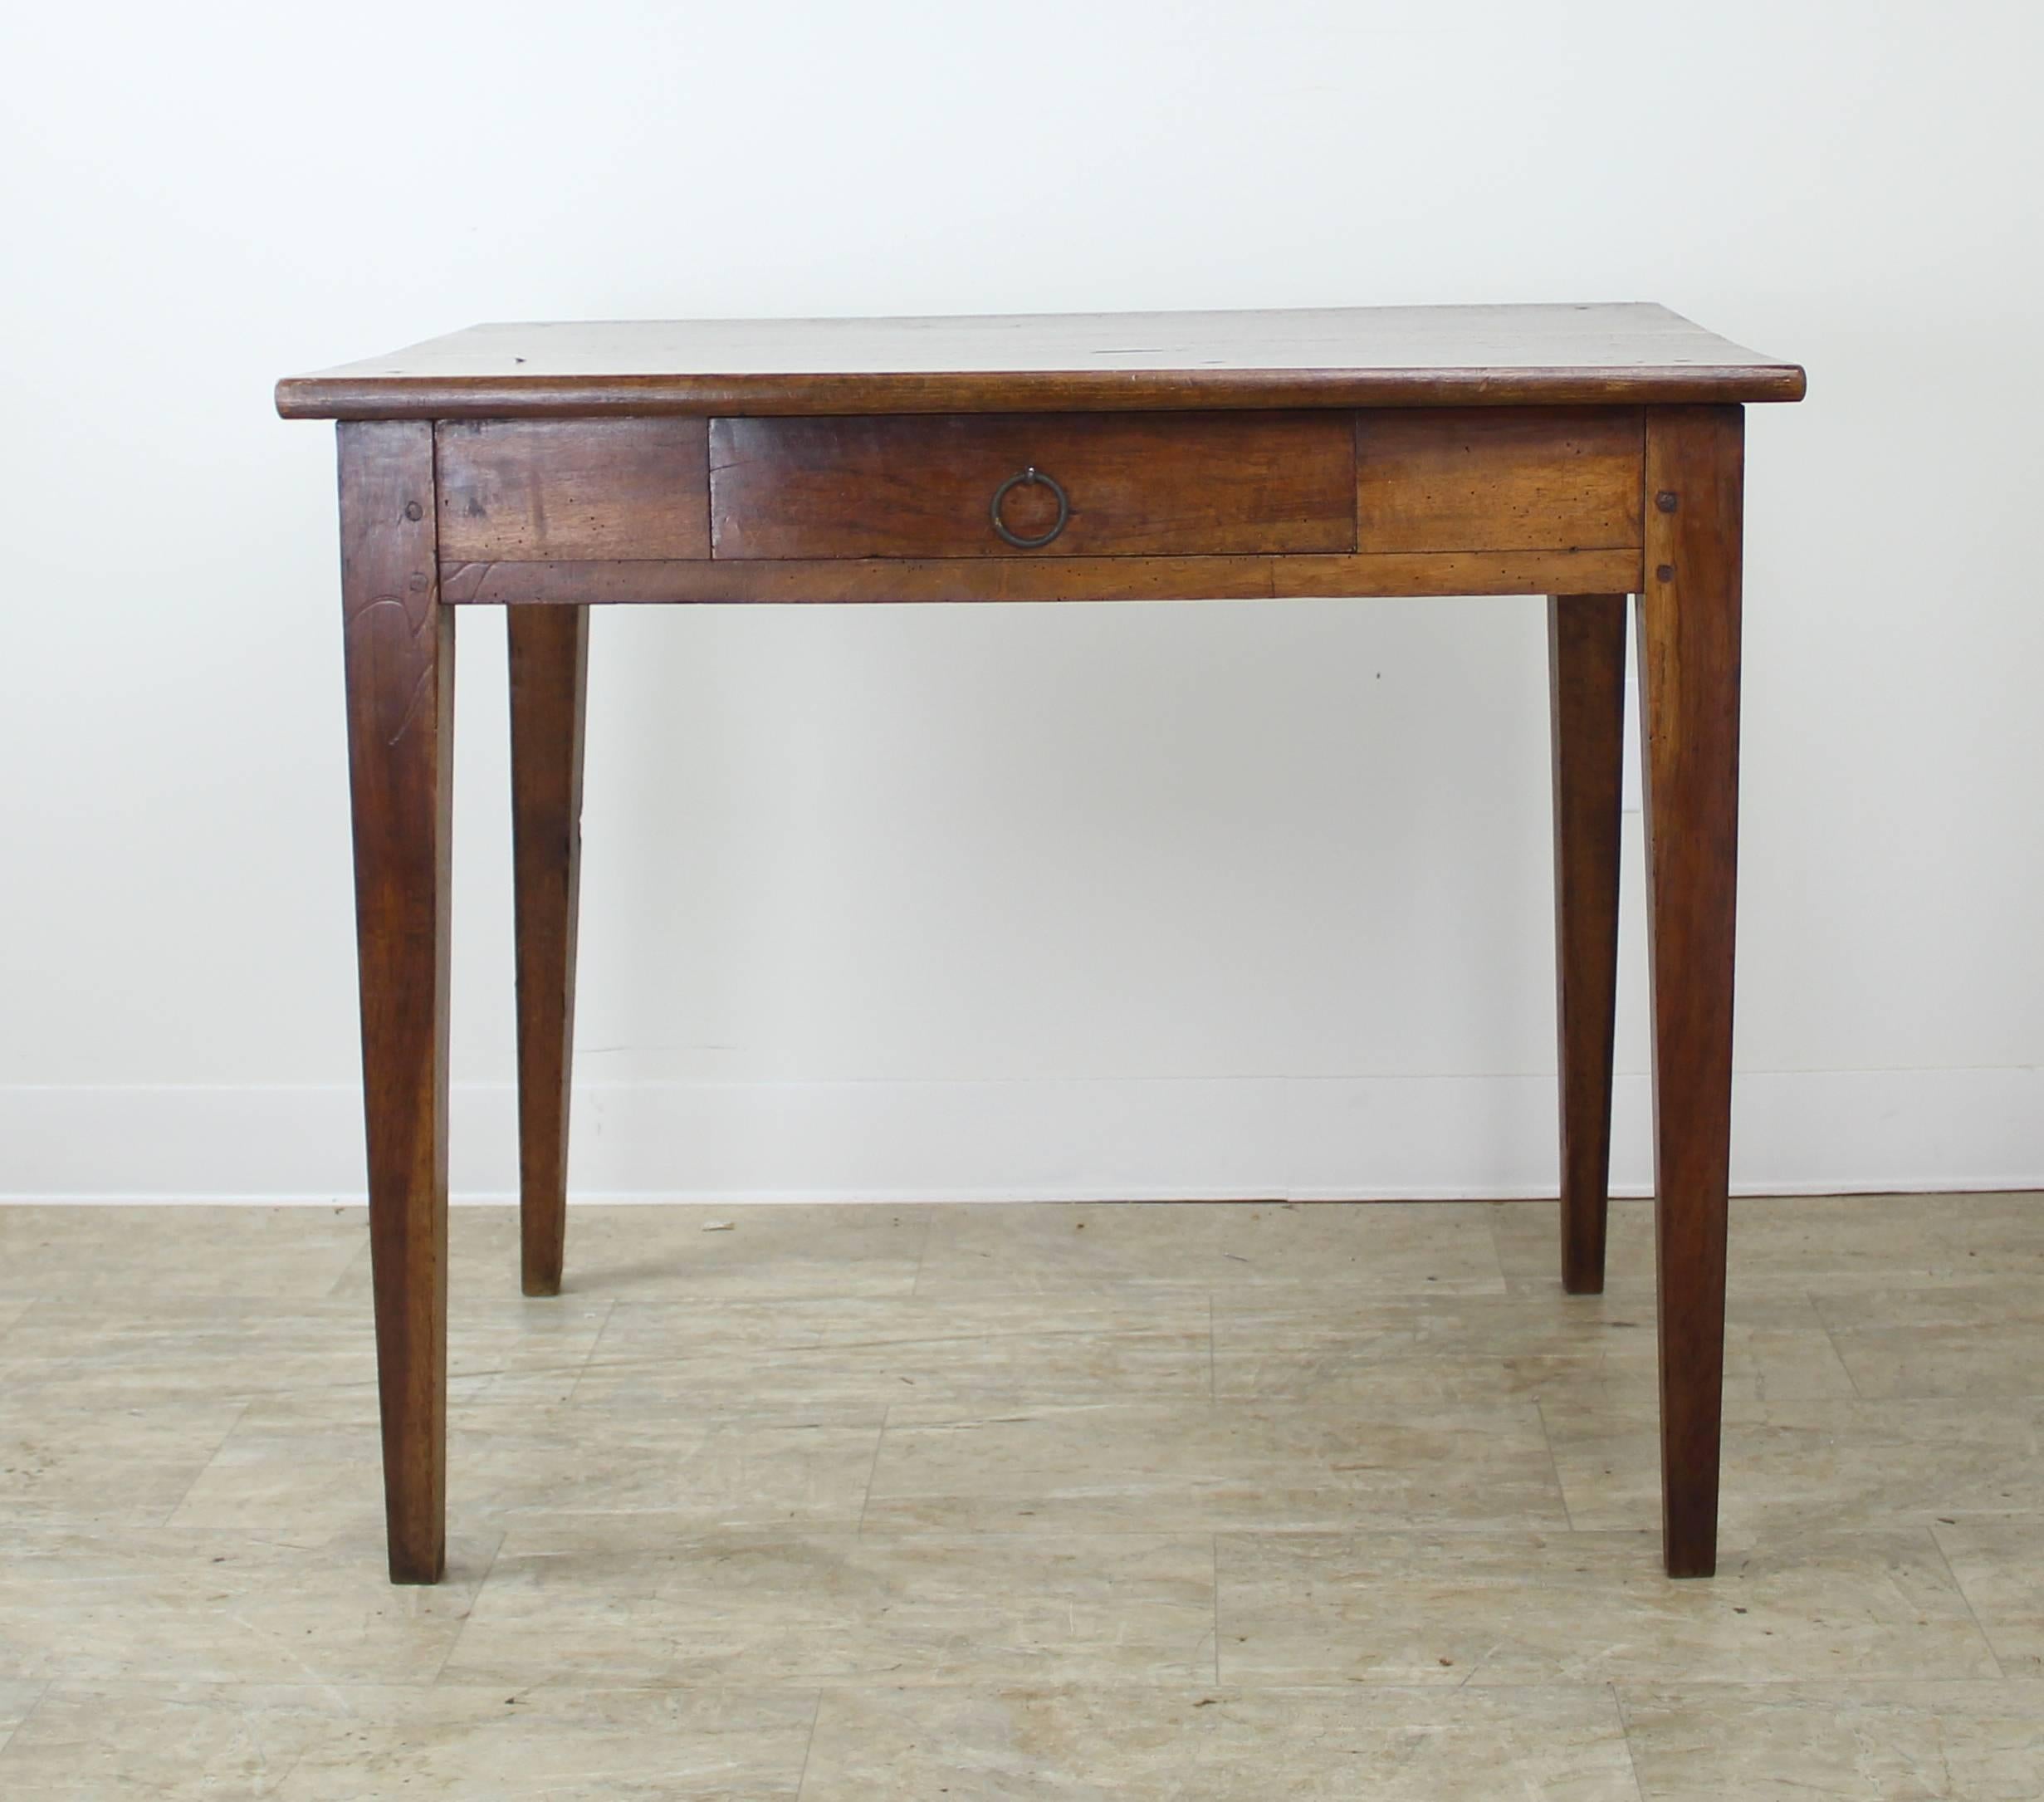 A charming side table, terrific walnut grain, this table is also a good height for a nightstand or a lamp table. One small drawer and lovely tapered legs.